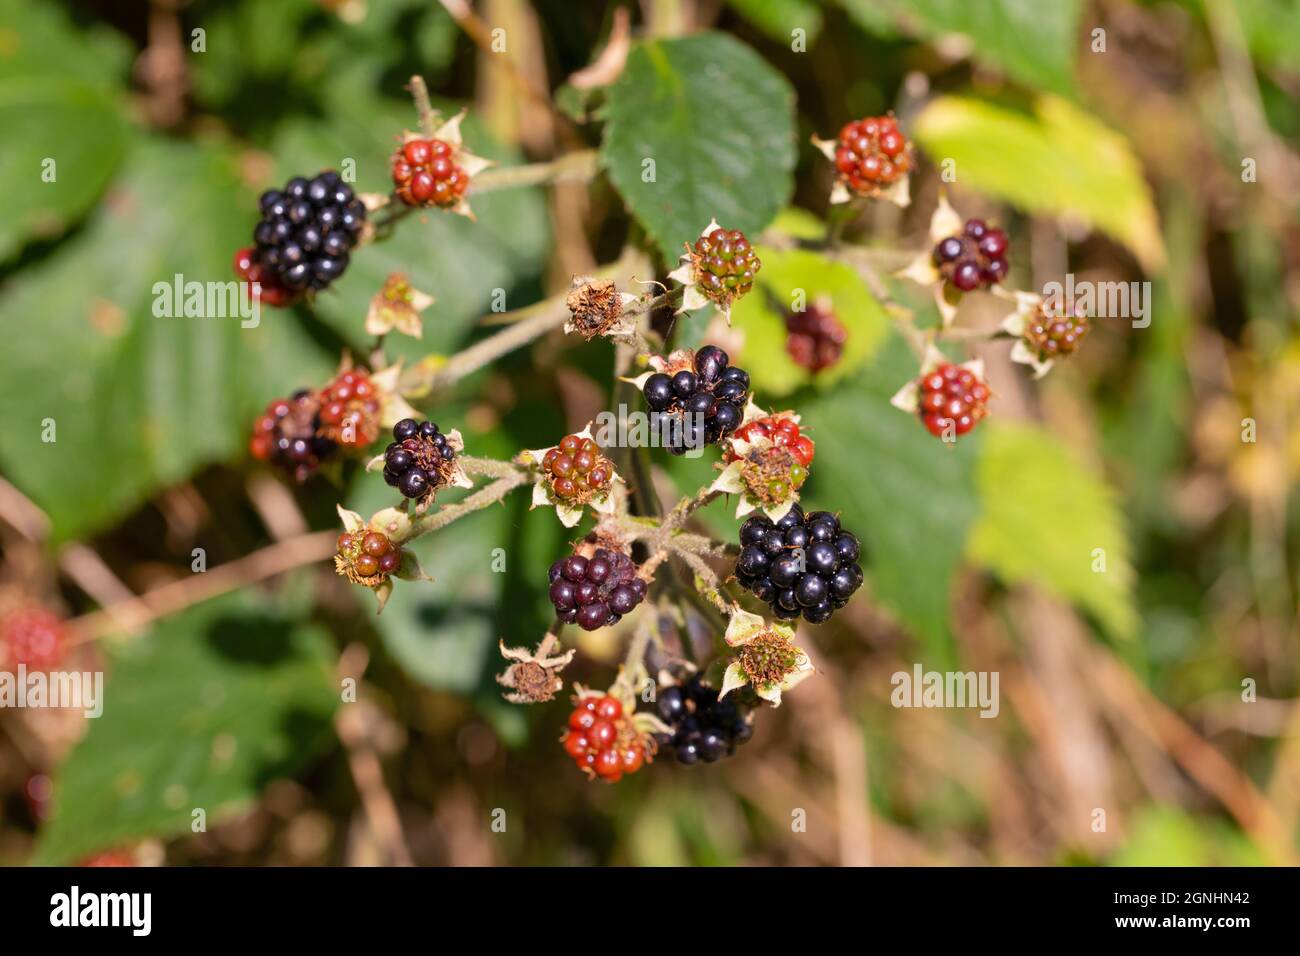 Blackberry, Blackberries, ripened and ripening ( Rubus fruticosus ). Bramble fruits in different stages of ripening. Colour attracts attention og frug Stock Photo